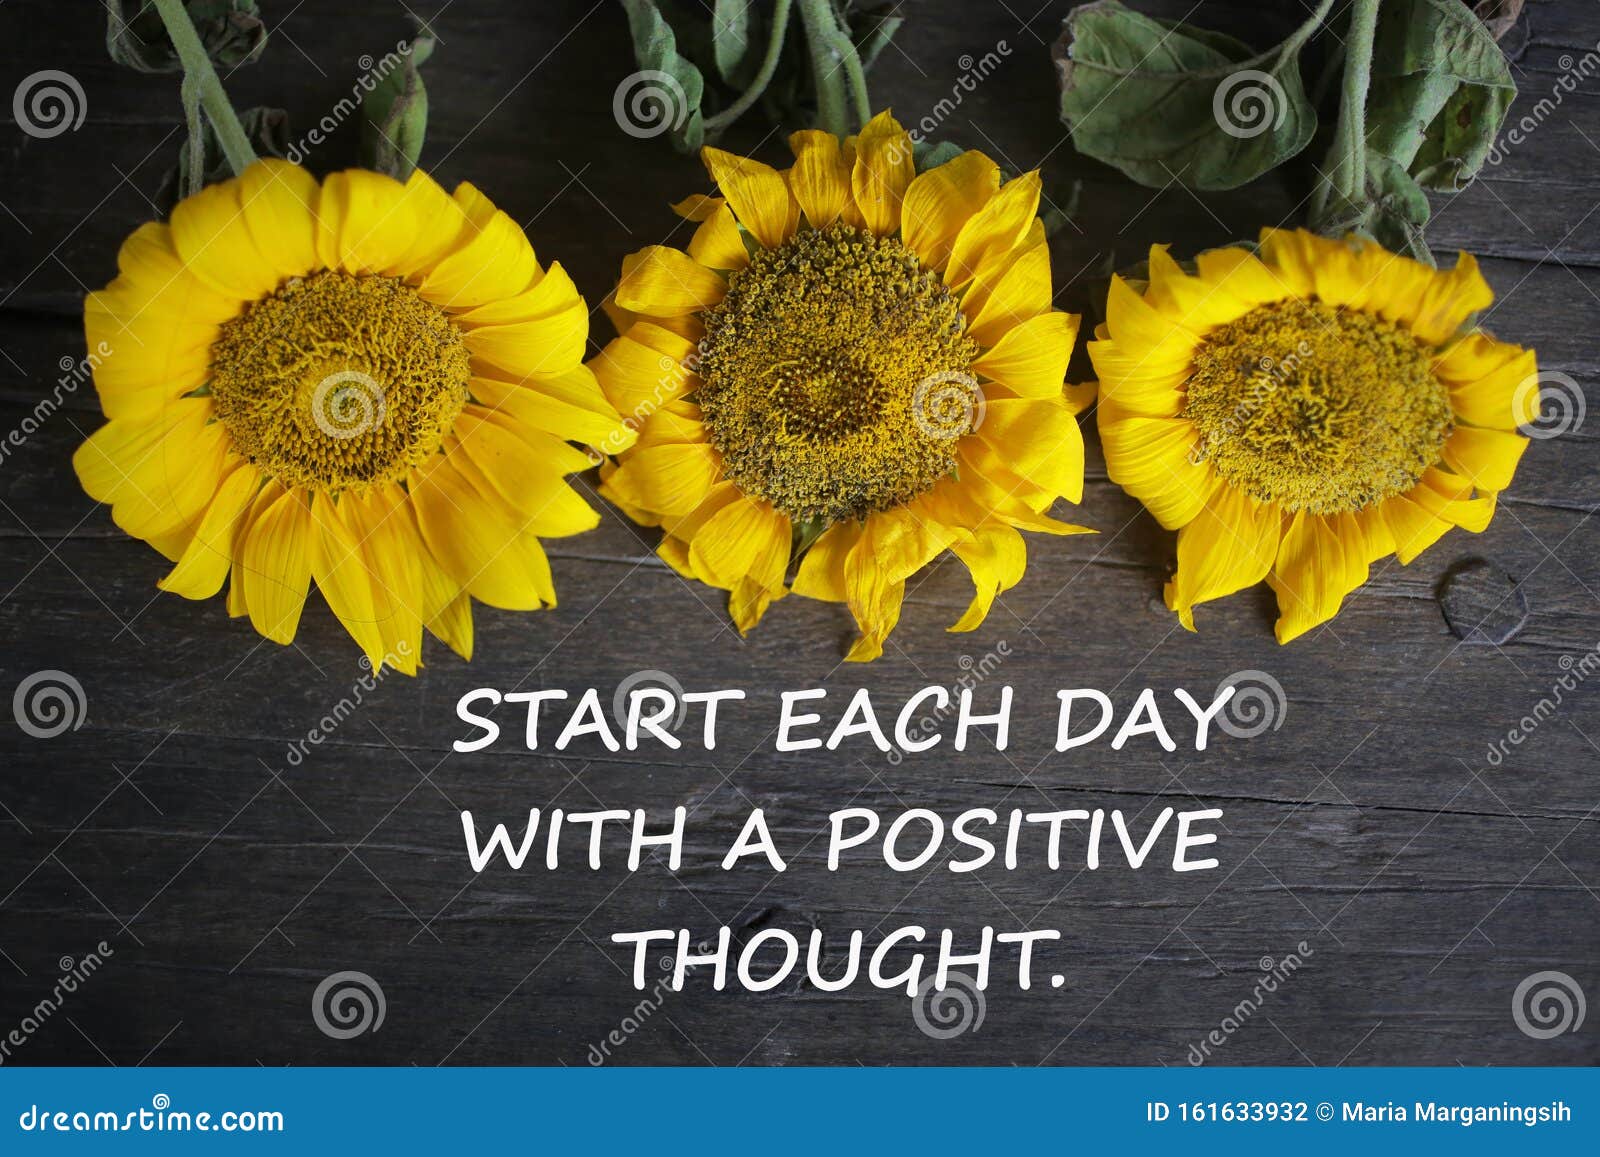 Inspirational Motivational Quote - Start Each Day with a Positive ...